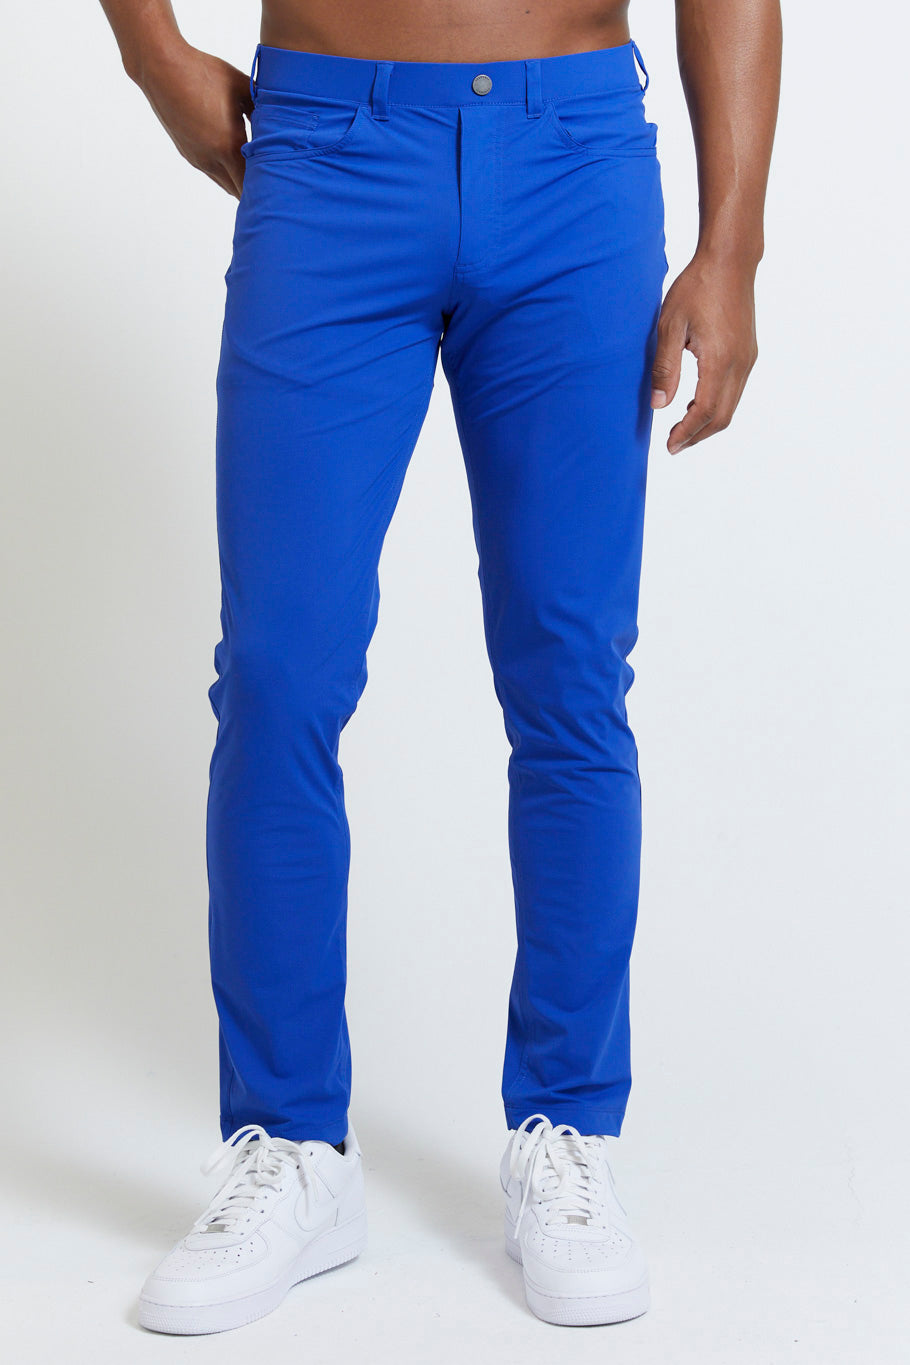 Image of the kent pull-on trouser in olympic